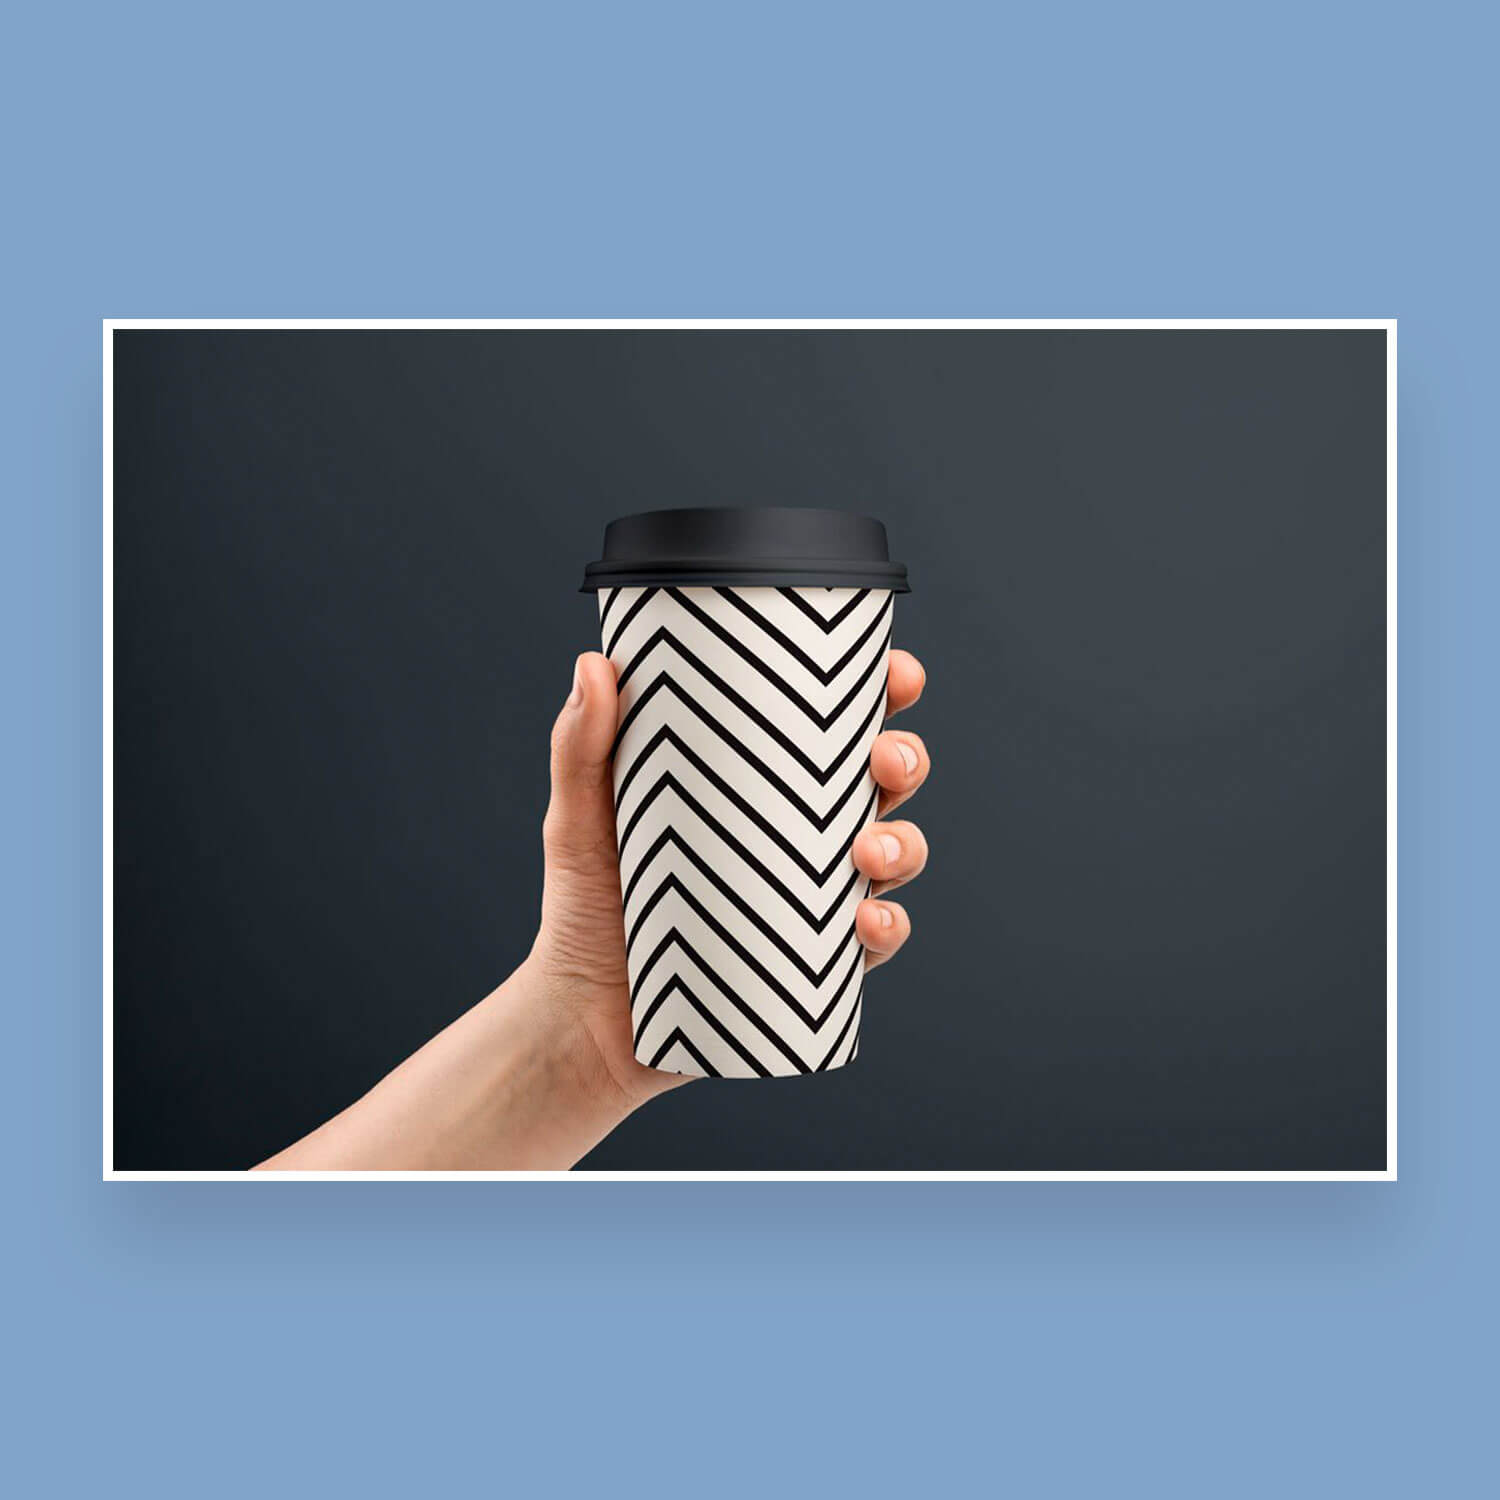 Disposable glass with geometric seamless patterns in black and white light.